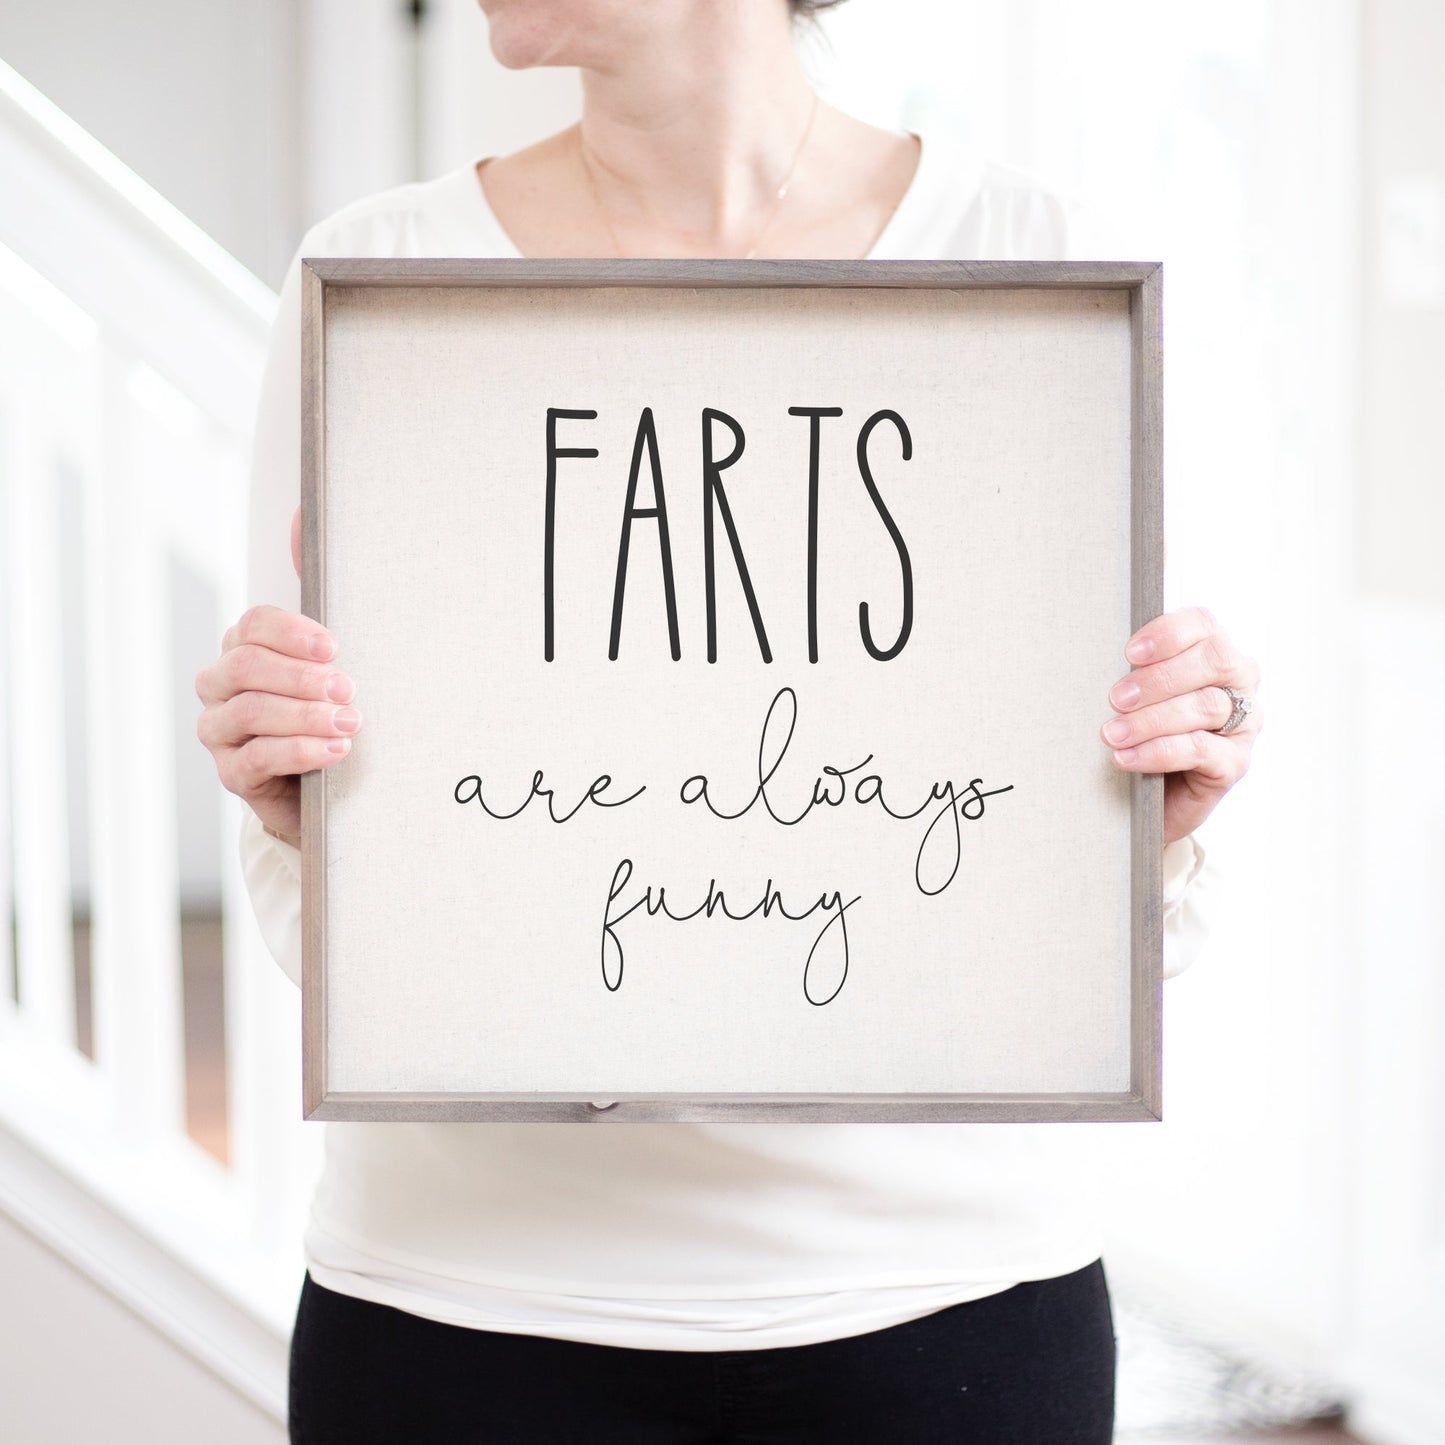 Load image into Gallery viewer, Farts Are Always Funny Bathroom Humor Farmhouse Signs | Wall Decor Bathroom | Bathroom Shelf Decor Funny Bathroom Decor | Bathroom Wall Art
